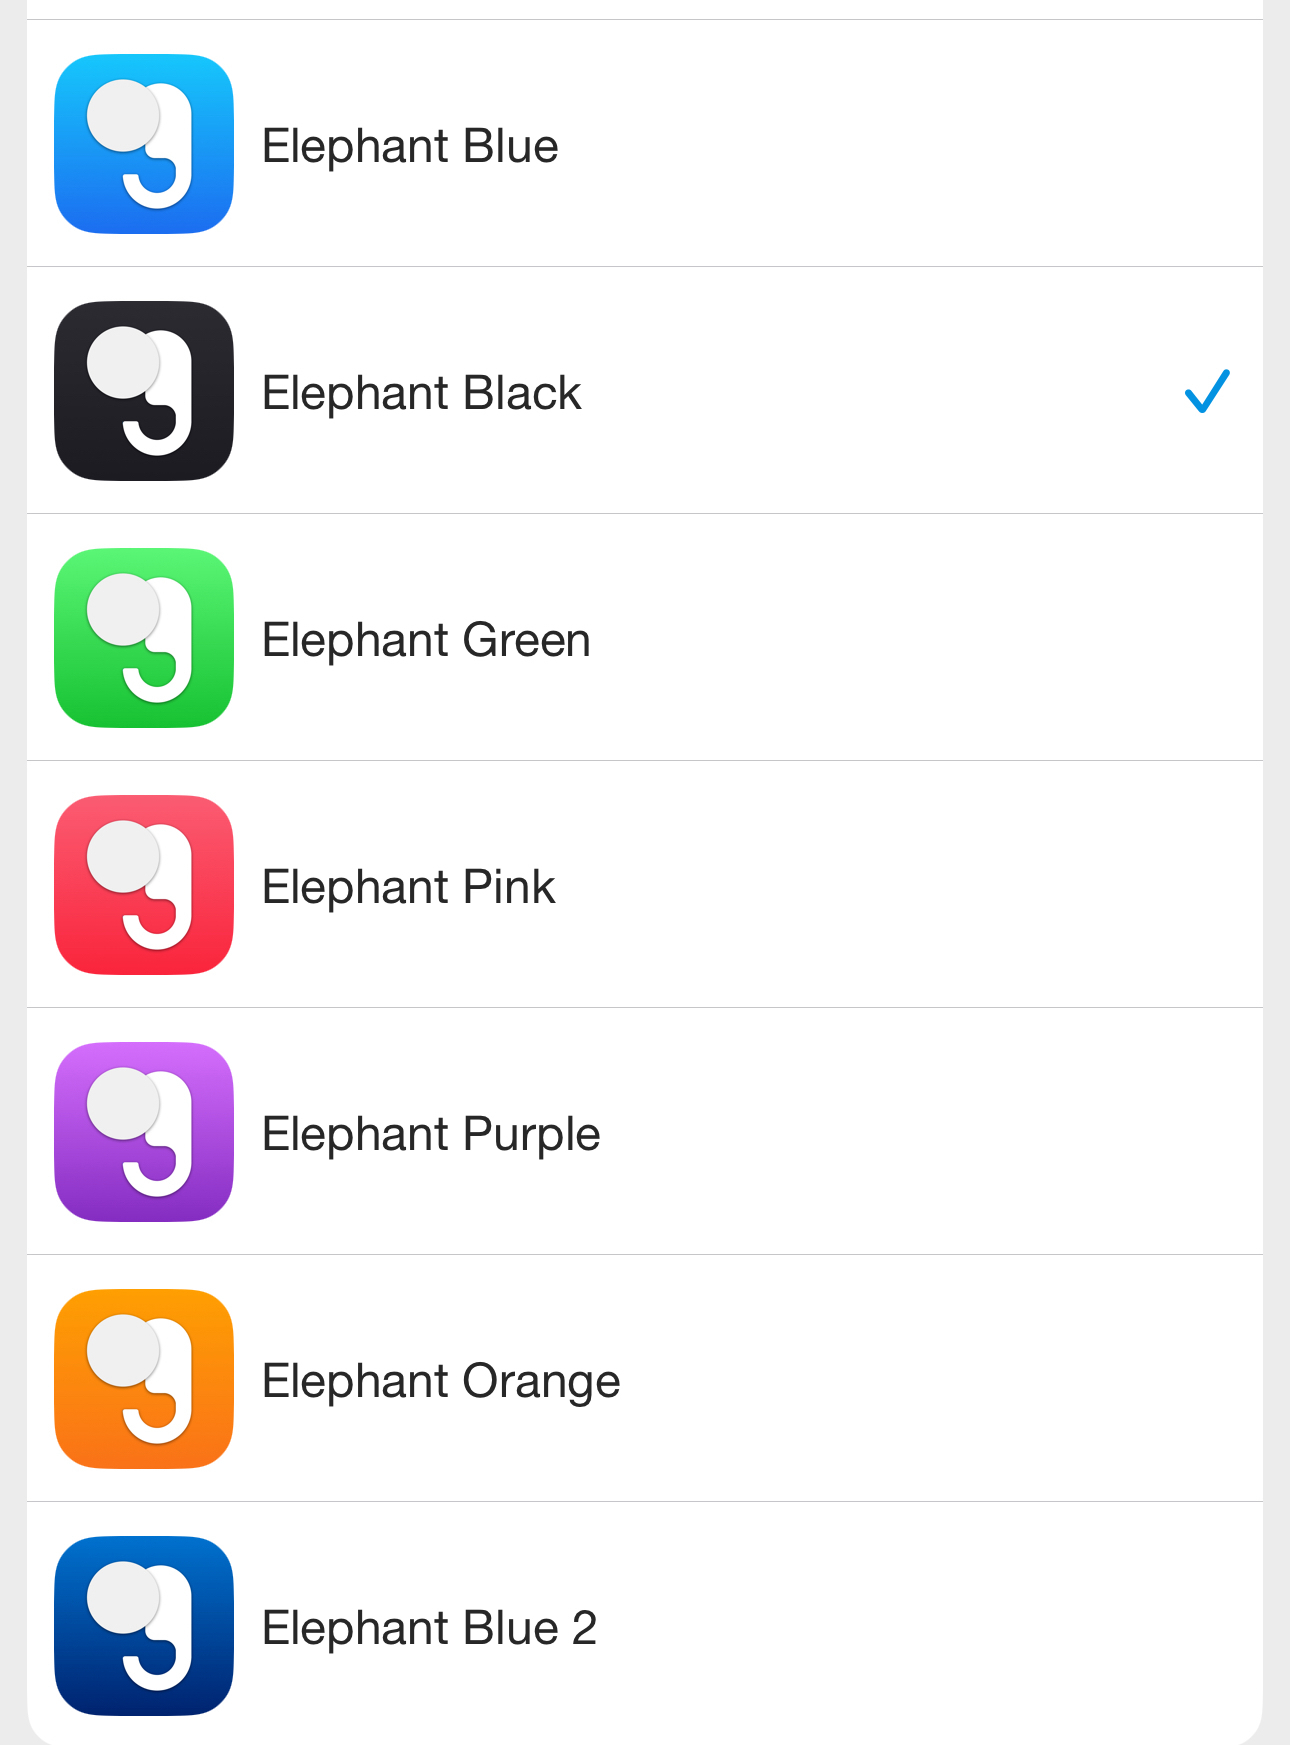 The image shows a list of app icons with the name “Elephant” followed by different color names such as Blue, Black, Green, Pink, Purple, Orange, and Blue 2. Each icon has a silhouette of an elephant’s head and